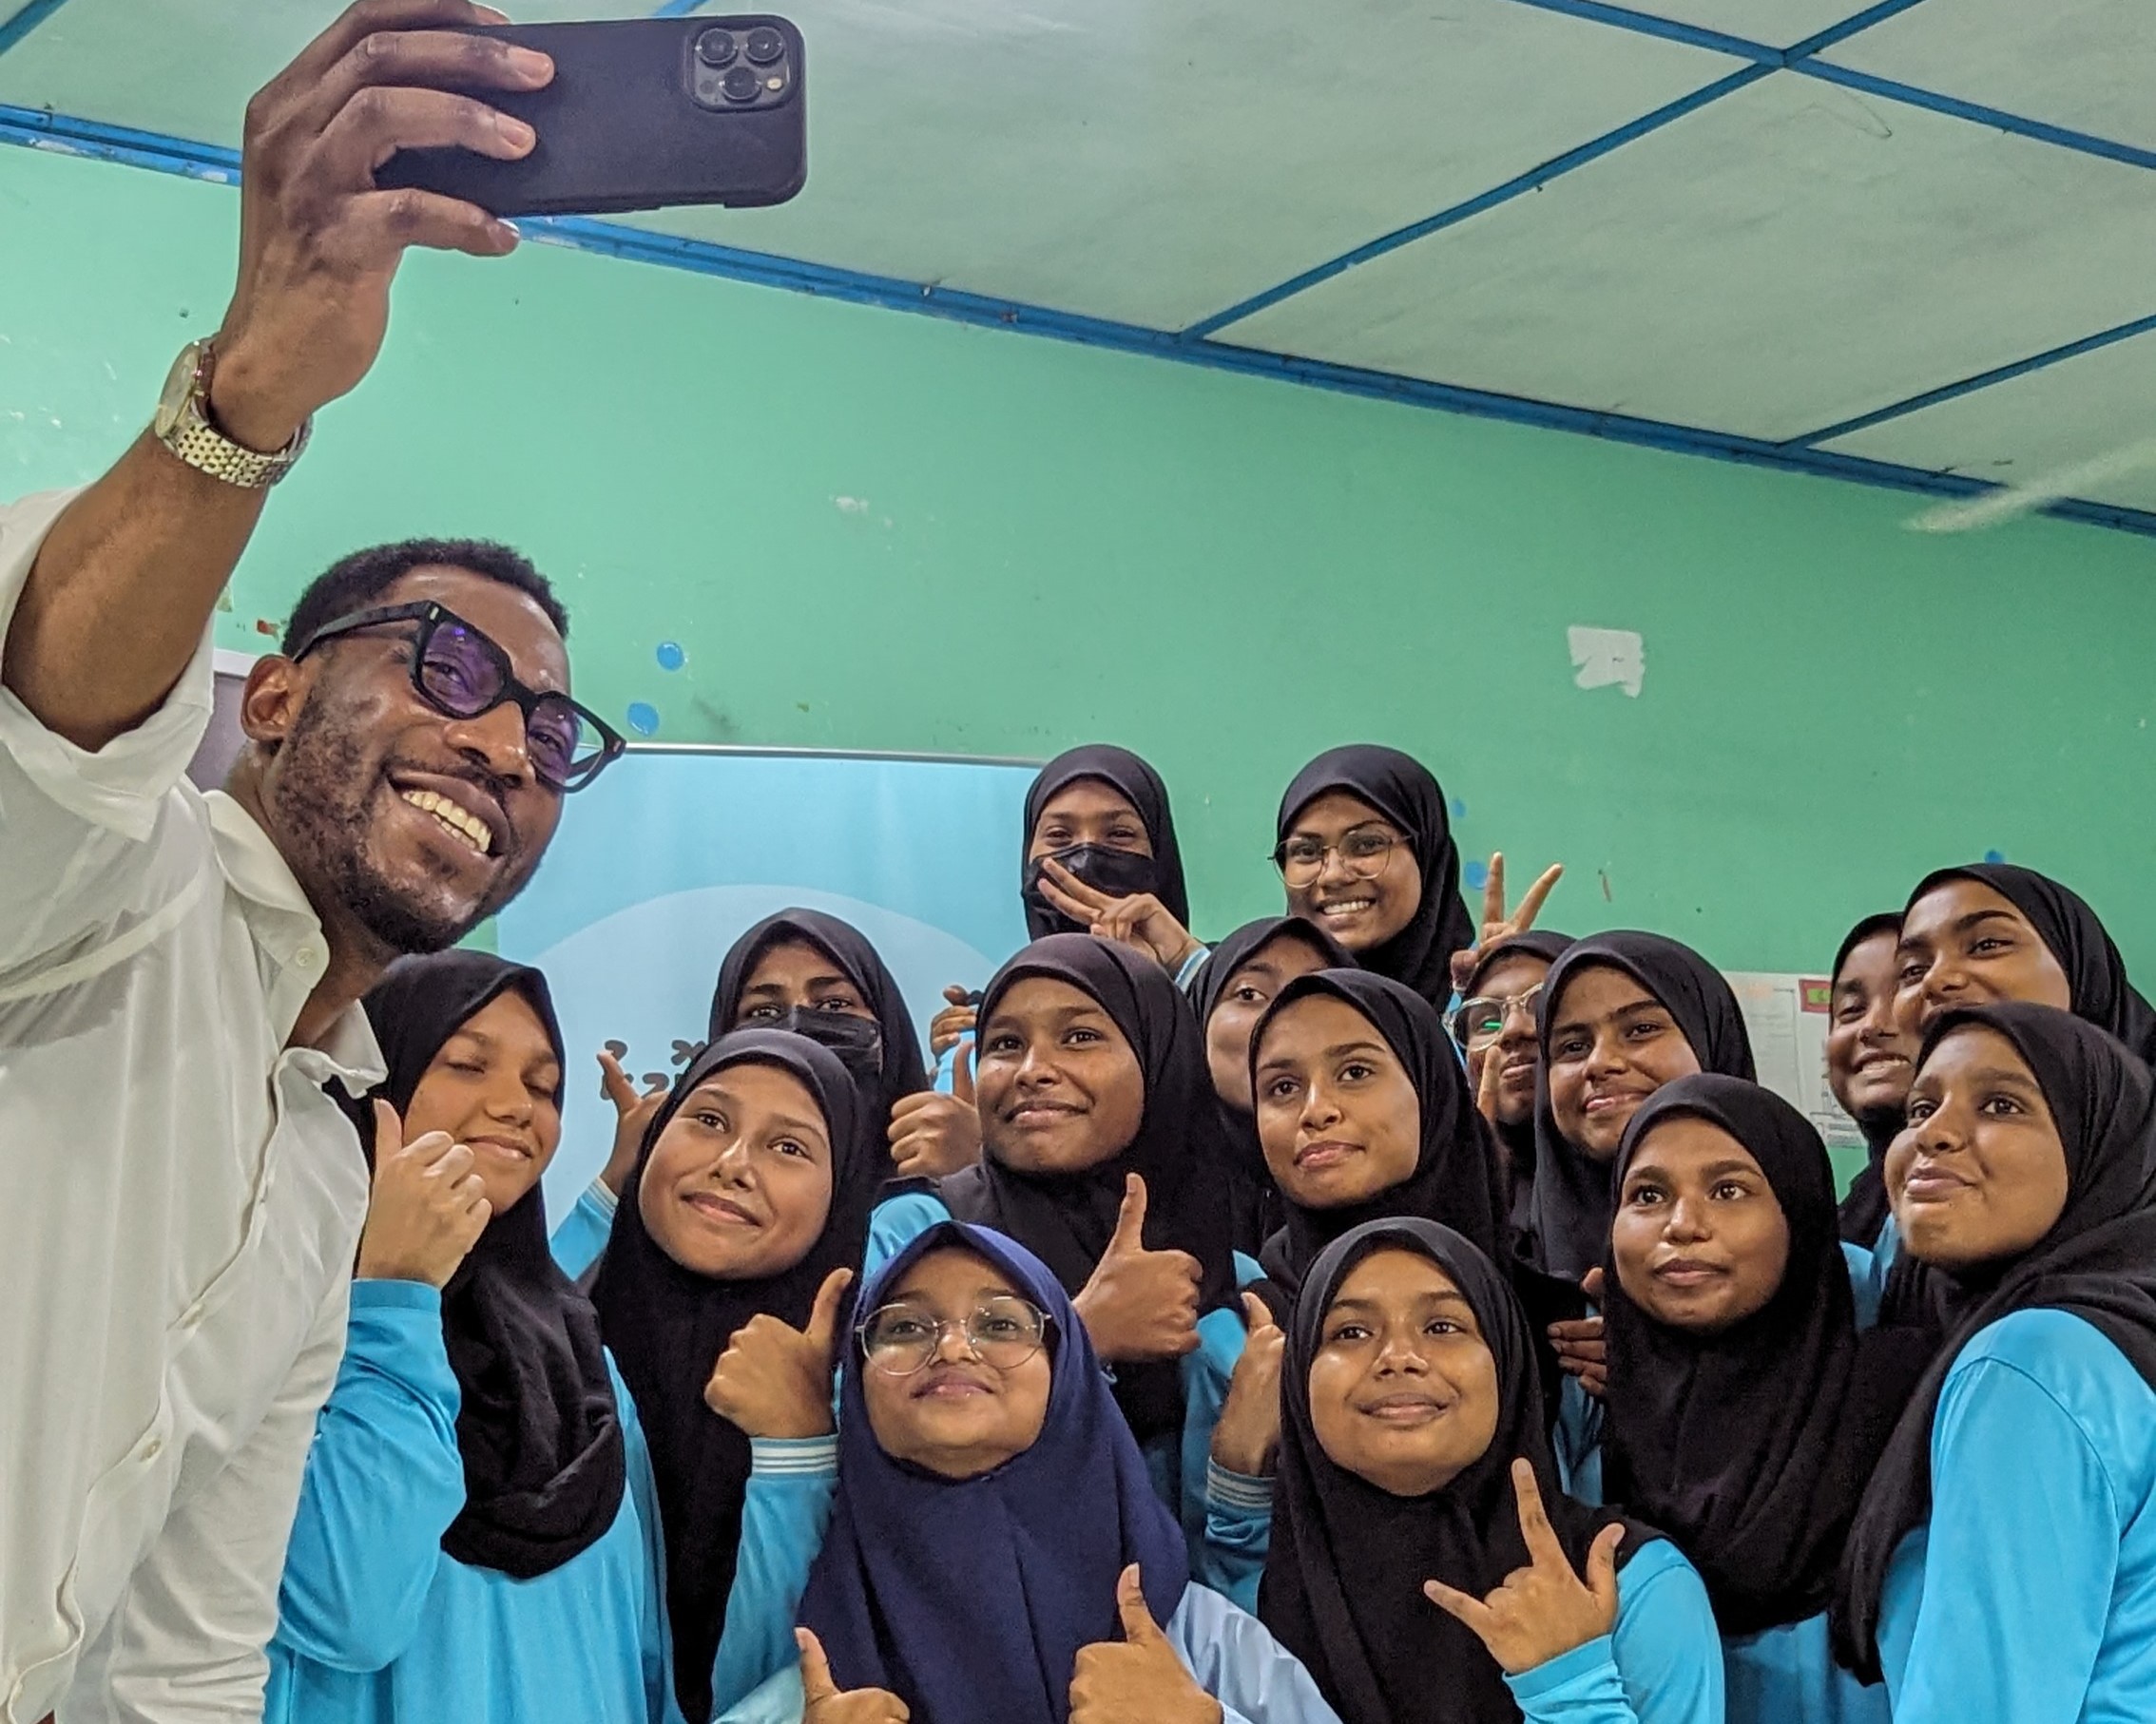 UNFPA Maldives Country Director, Mr. Kunle Adeniyi takes a selfie with the students of N. Lhohi School at the ‘Menstrupedia’ Book Reading Session. © UNFPA Maldives